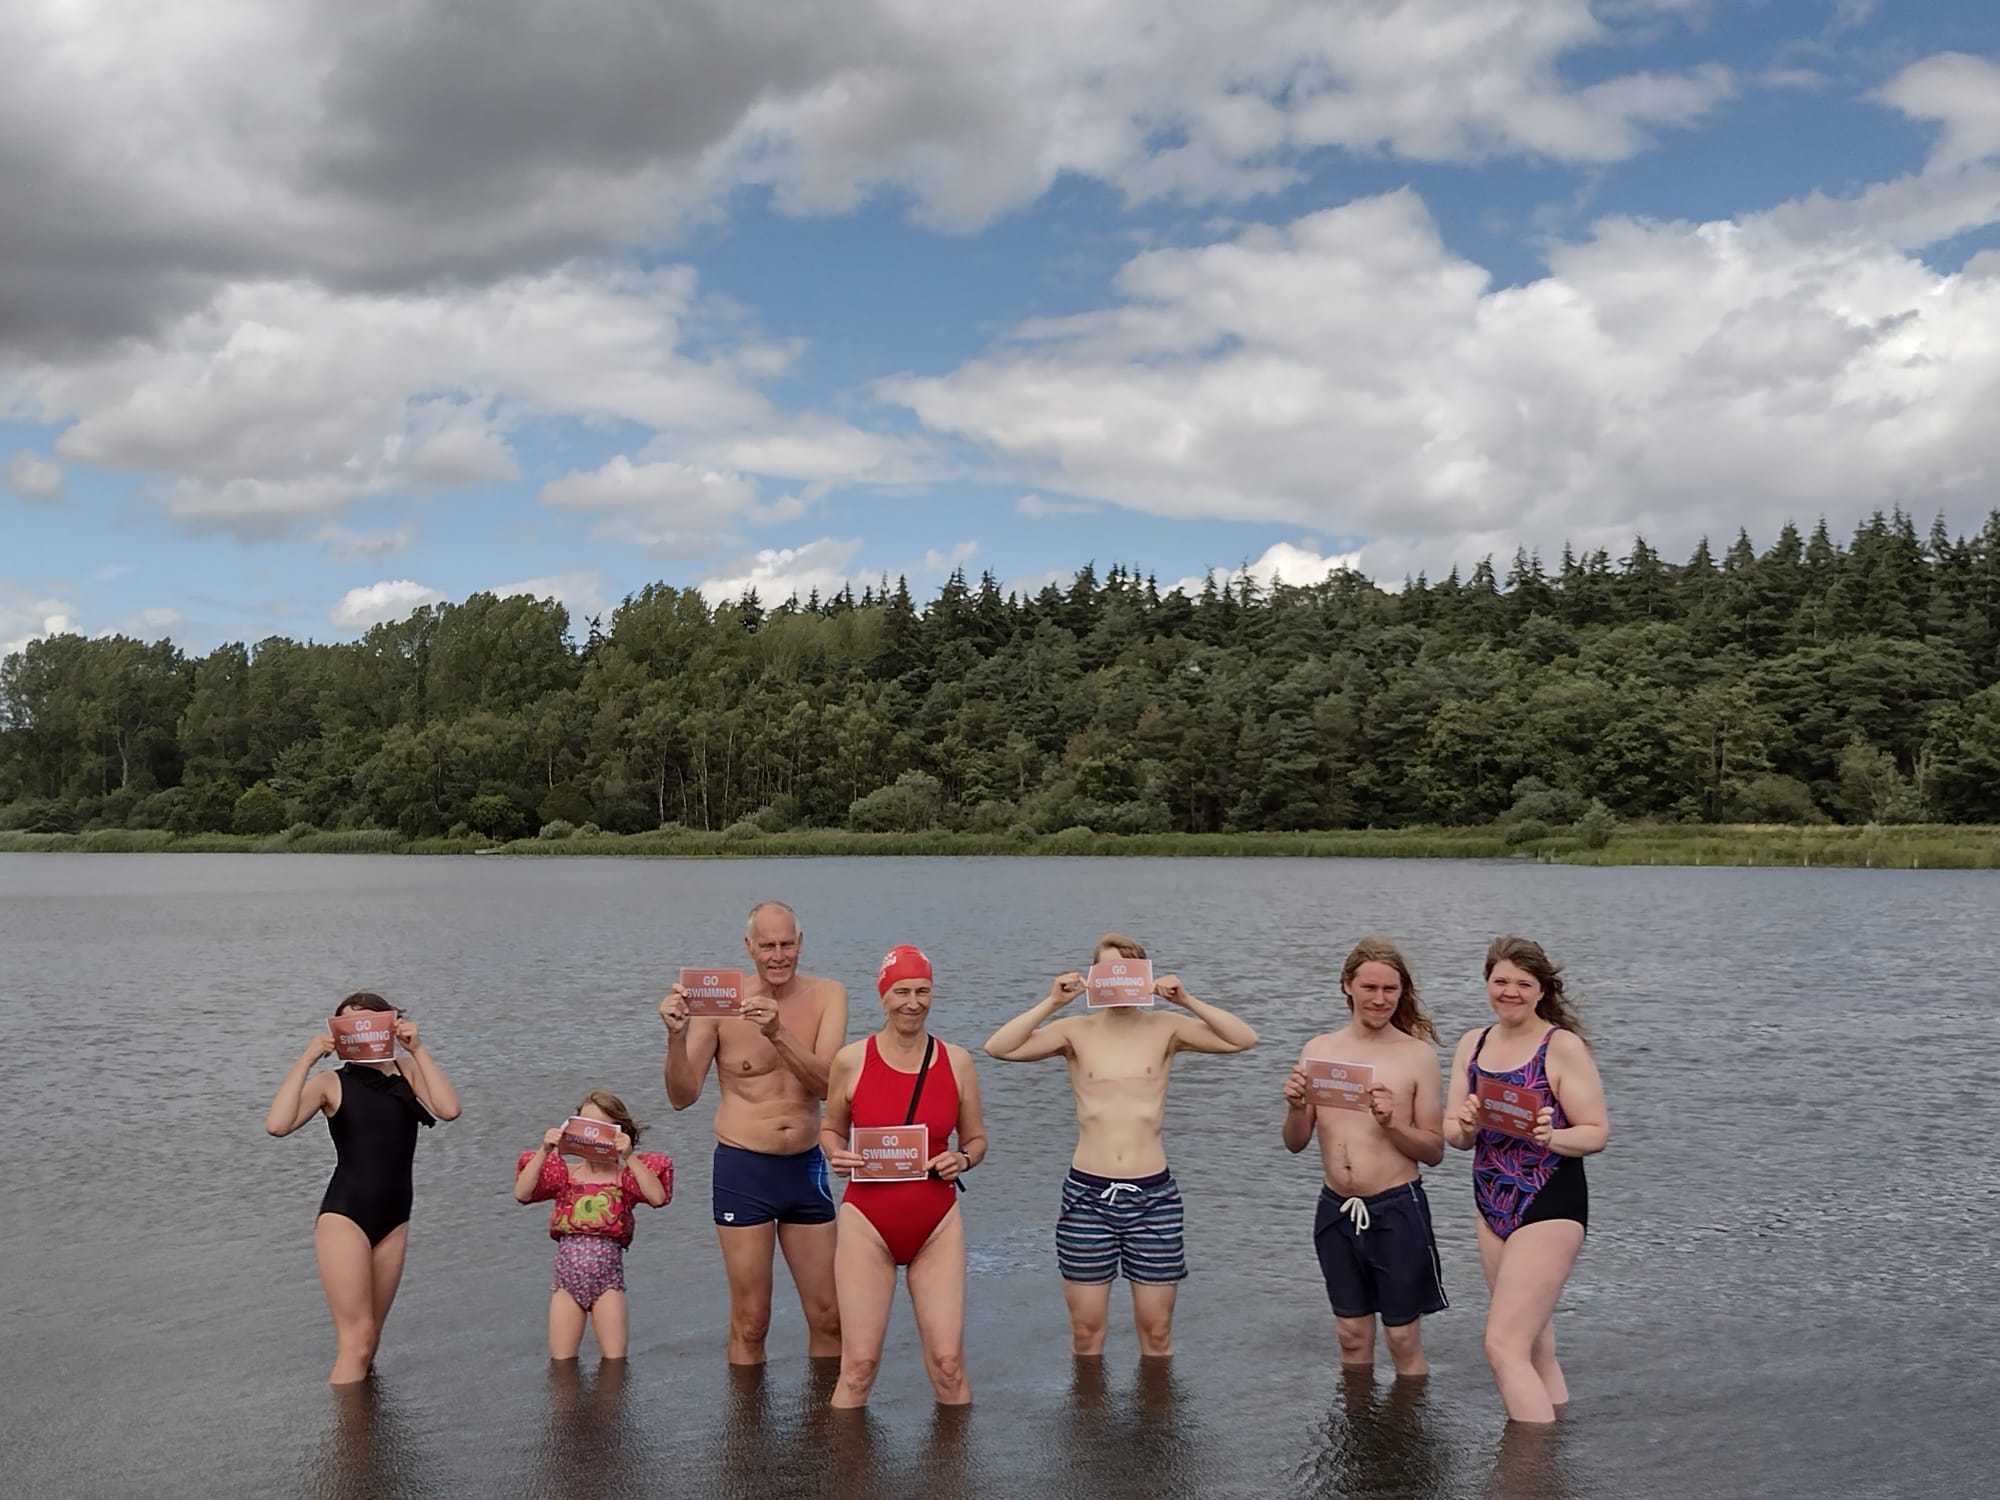 swimmers in a lake holding placards saying 'Go Swimming'